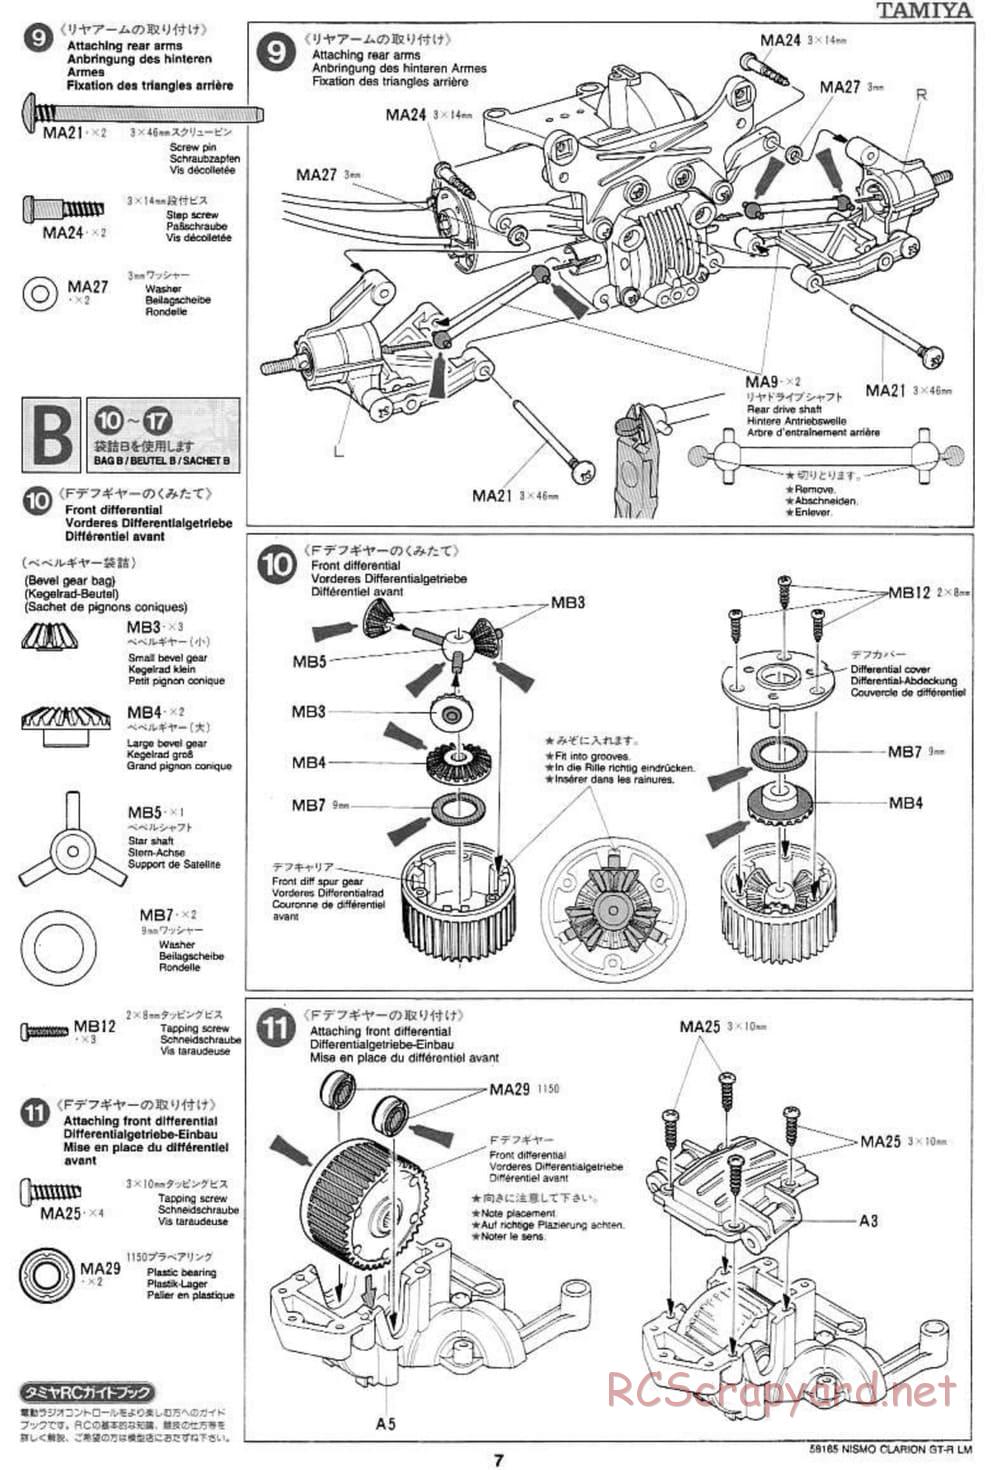 Tamiya - Nismo Clarion GT-R LM - TA-02W Chassis - Manual - Page 7